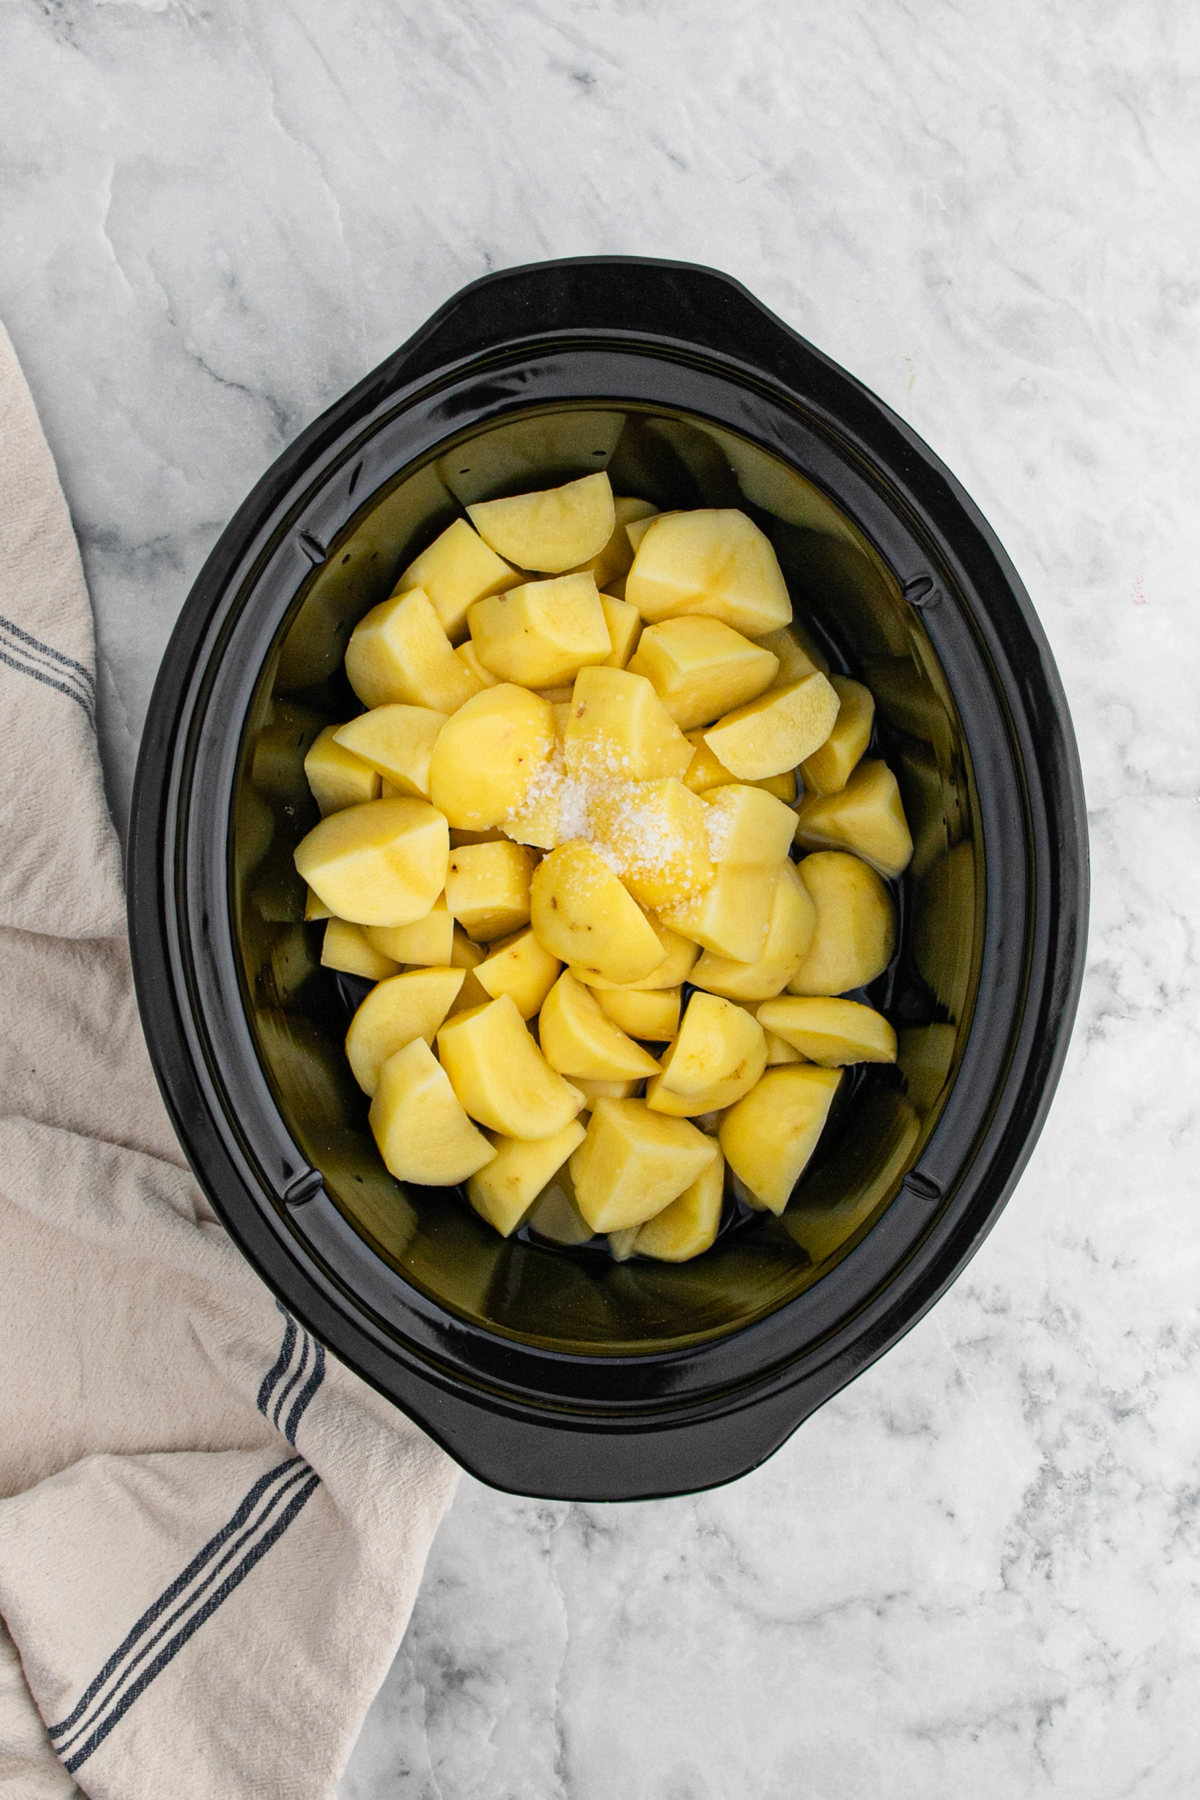 Potatoes diced in a slow cooker